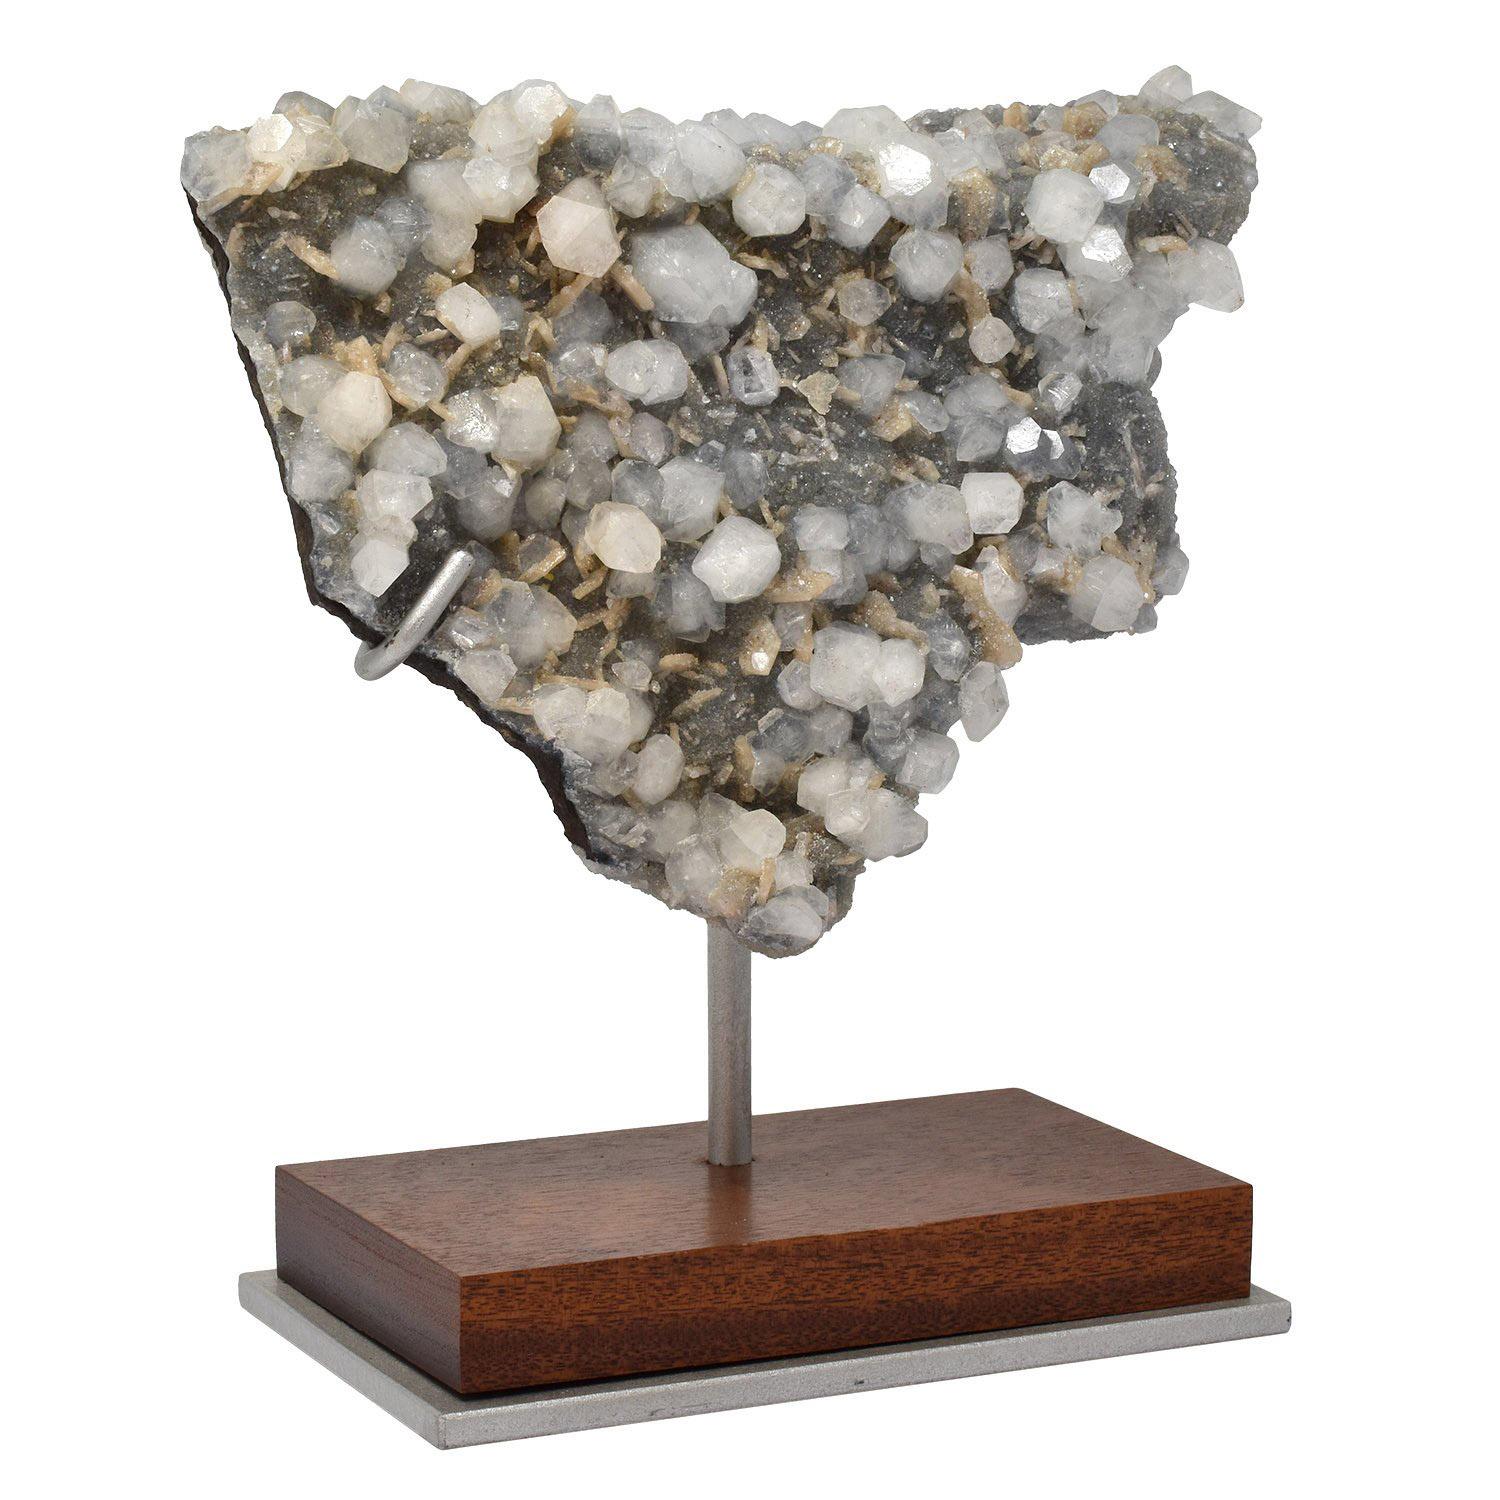 Mounted Specimen: Apophyllite, Stilbite, Chalcedony #L9W
Dimensions: 6 x 8.5 x 2.5 in. / 15 x 22 x 6 cm
Height on custom display stand: 9 in. / 23 cm

One of a kind.

The multi-faceted surfaces of the crystals create a twinkling effect as they